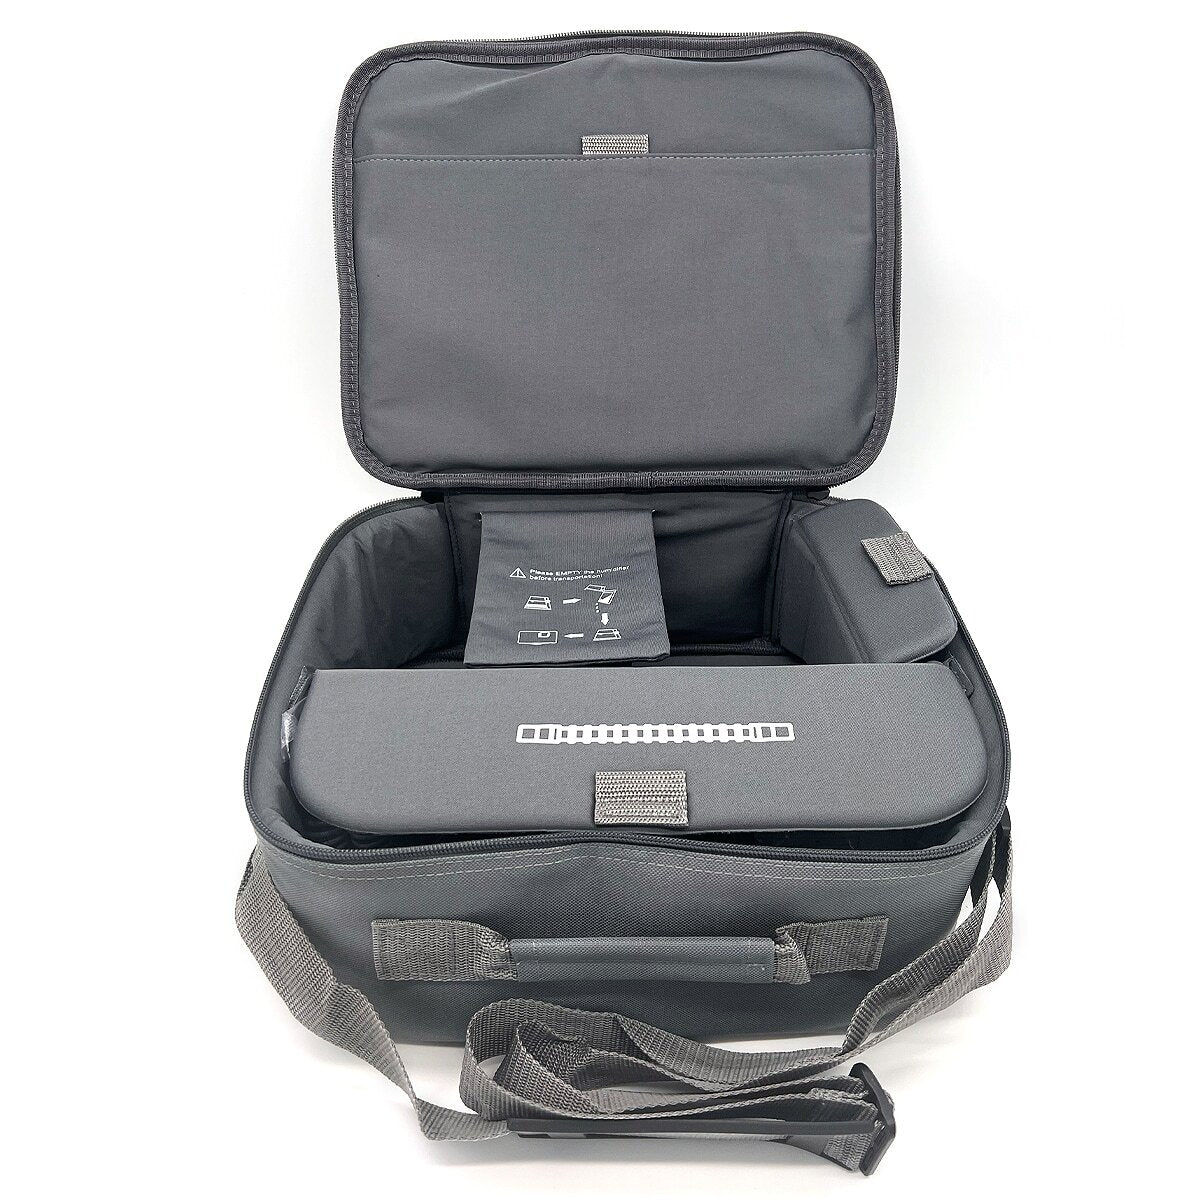 This Travel Bag from 3B Medical is designed for use with all Luna G3 CPAP &amp; BiPAP machines.